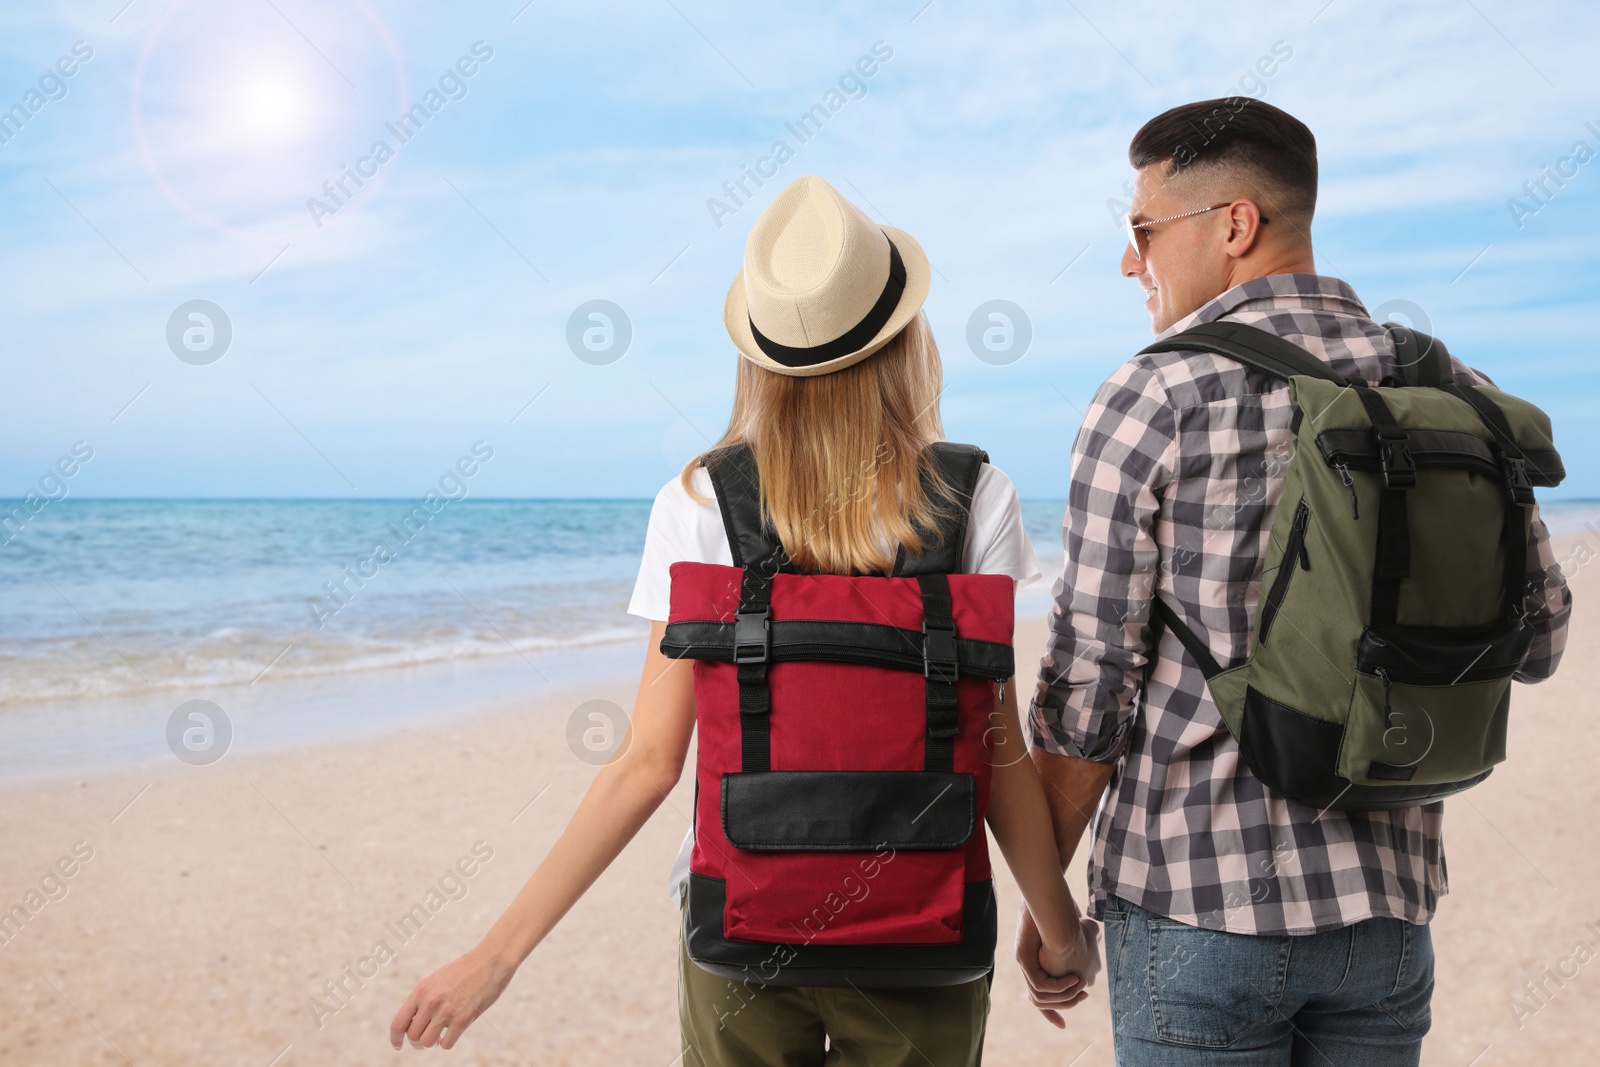 Image of Travelers with backpacks on sandy beach near sea during summer vacation trip, back view. Space for text